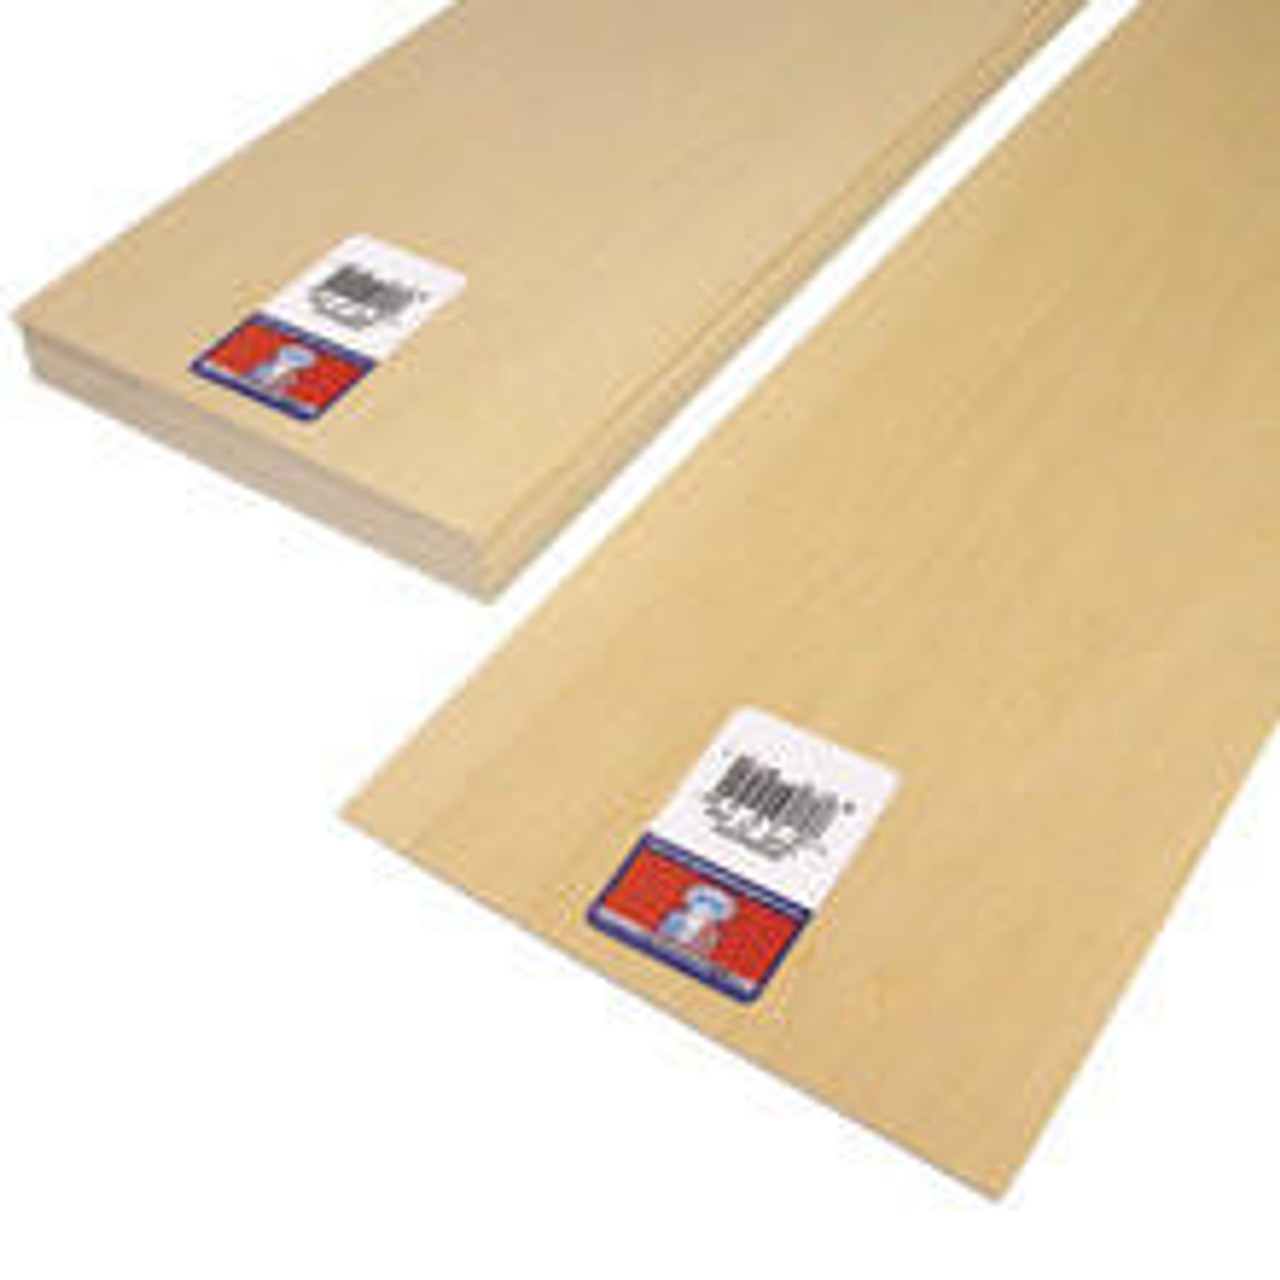 1/4 basswood sheets 6mm plywood for